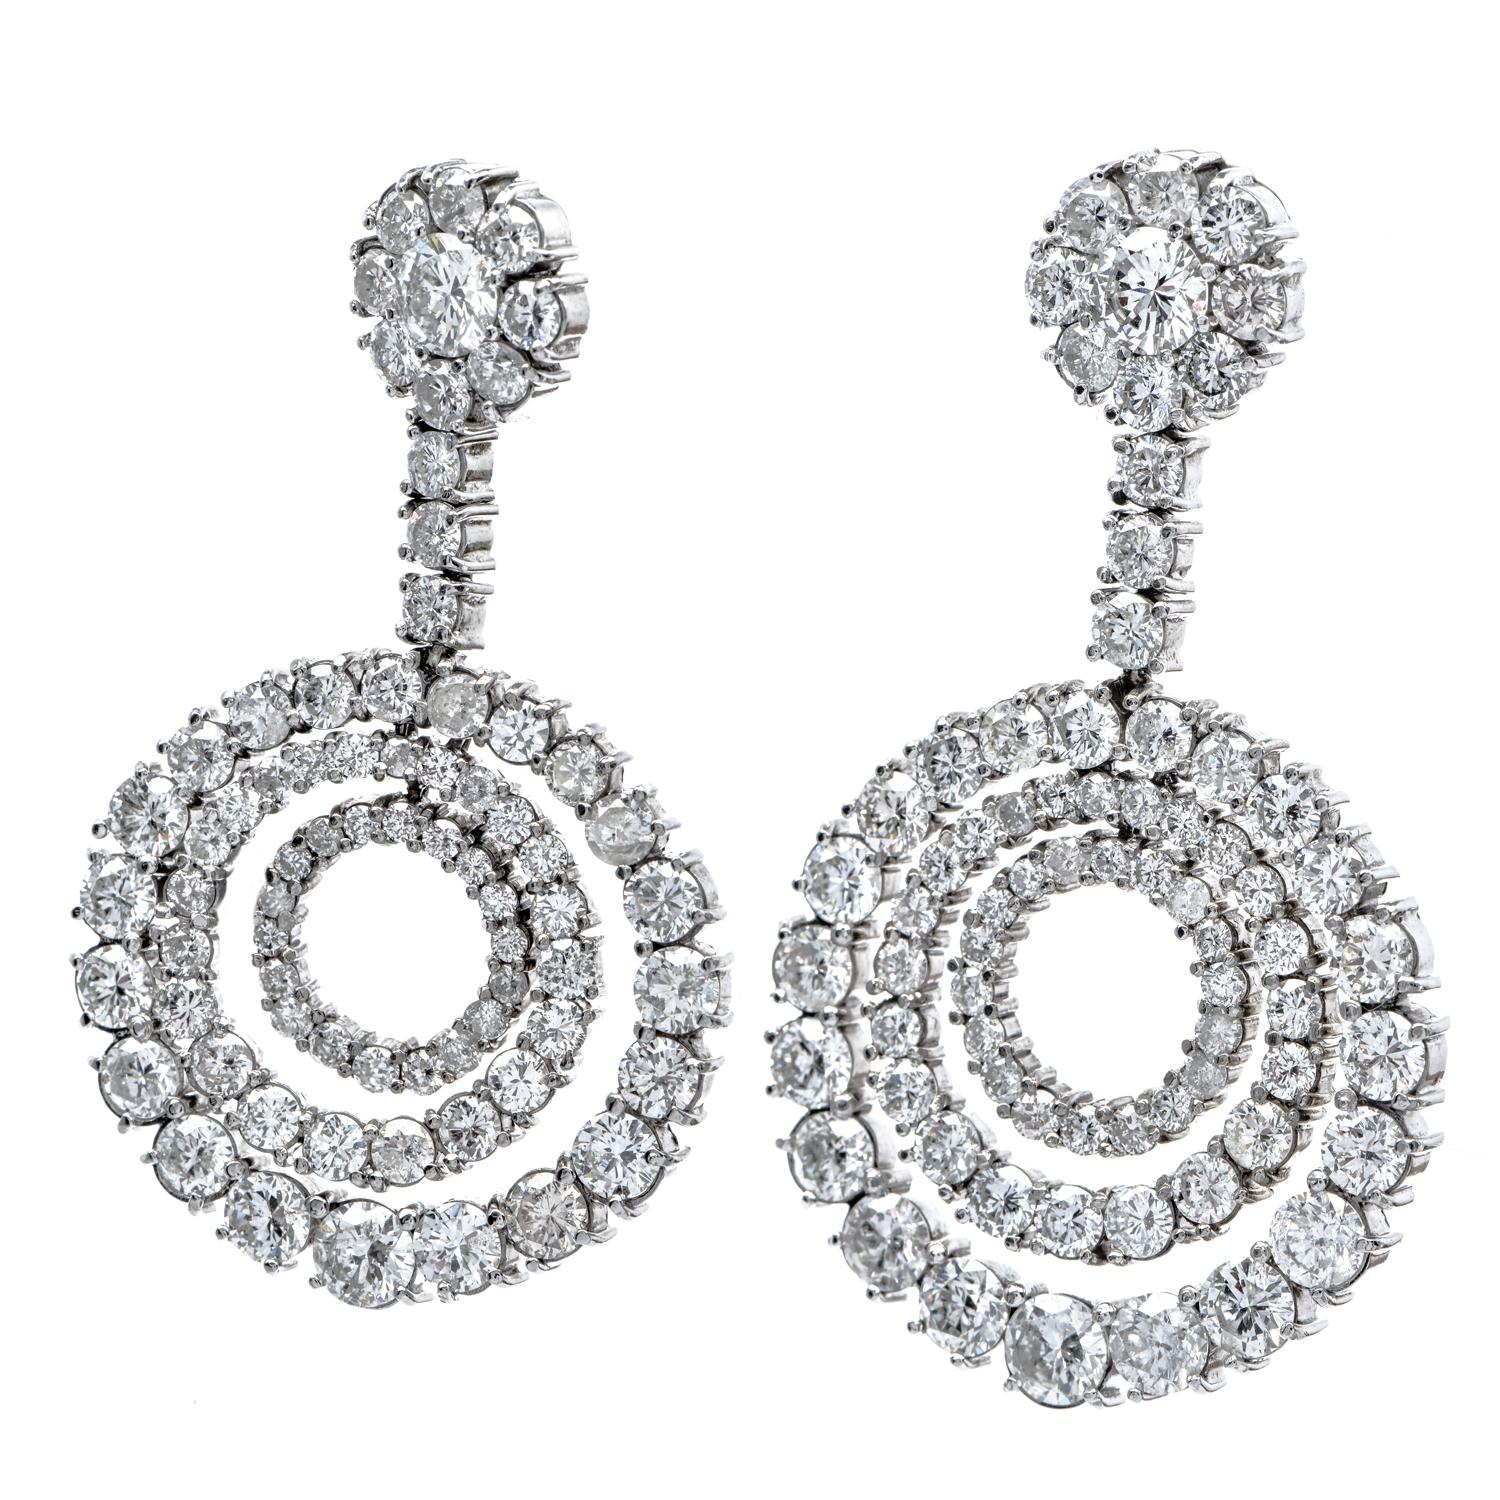 This Vintage. earrings with an Art deco design, are from circa the 1960s and display a Circular Drop design.

Completely covered in diamonds, prong set, with 126 round Genuine diamonds, weighing in a total of 15.20 carats, G-H color &